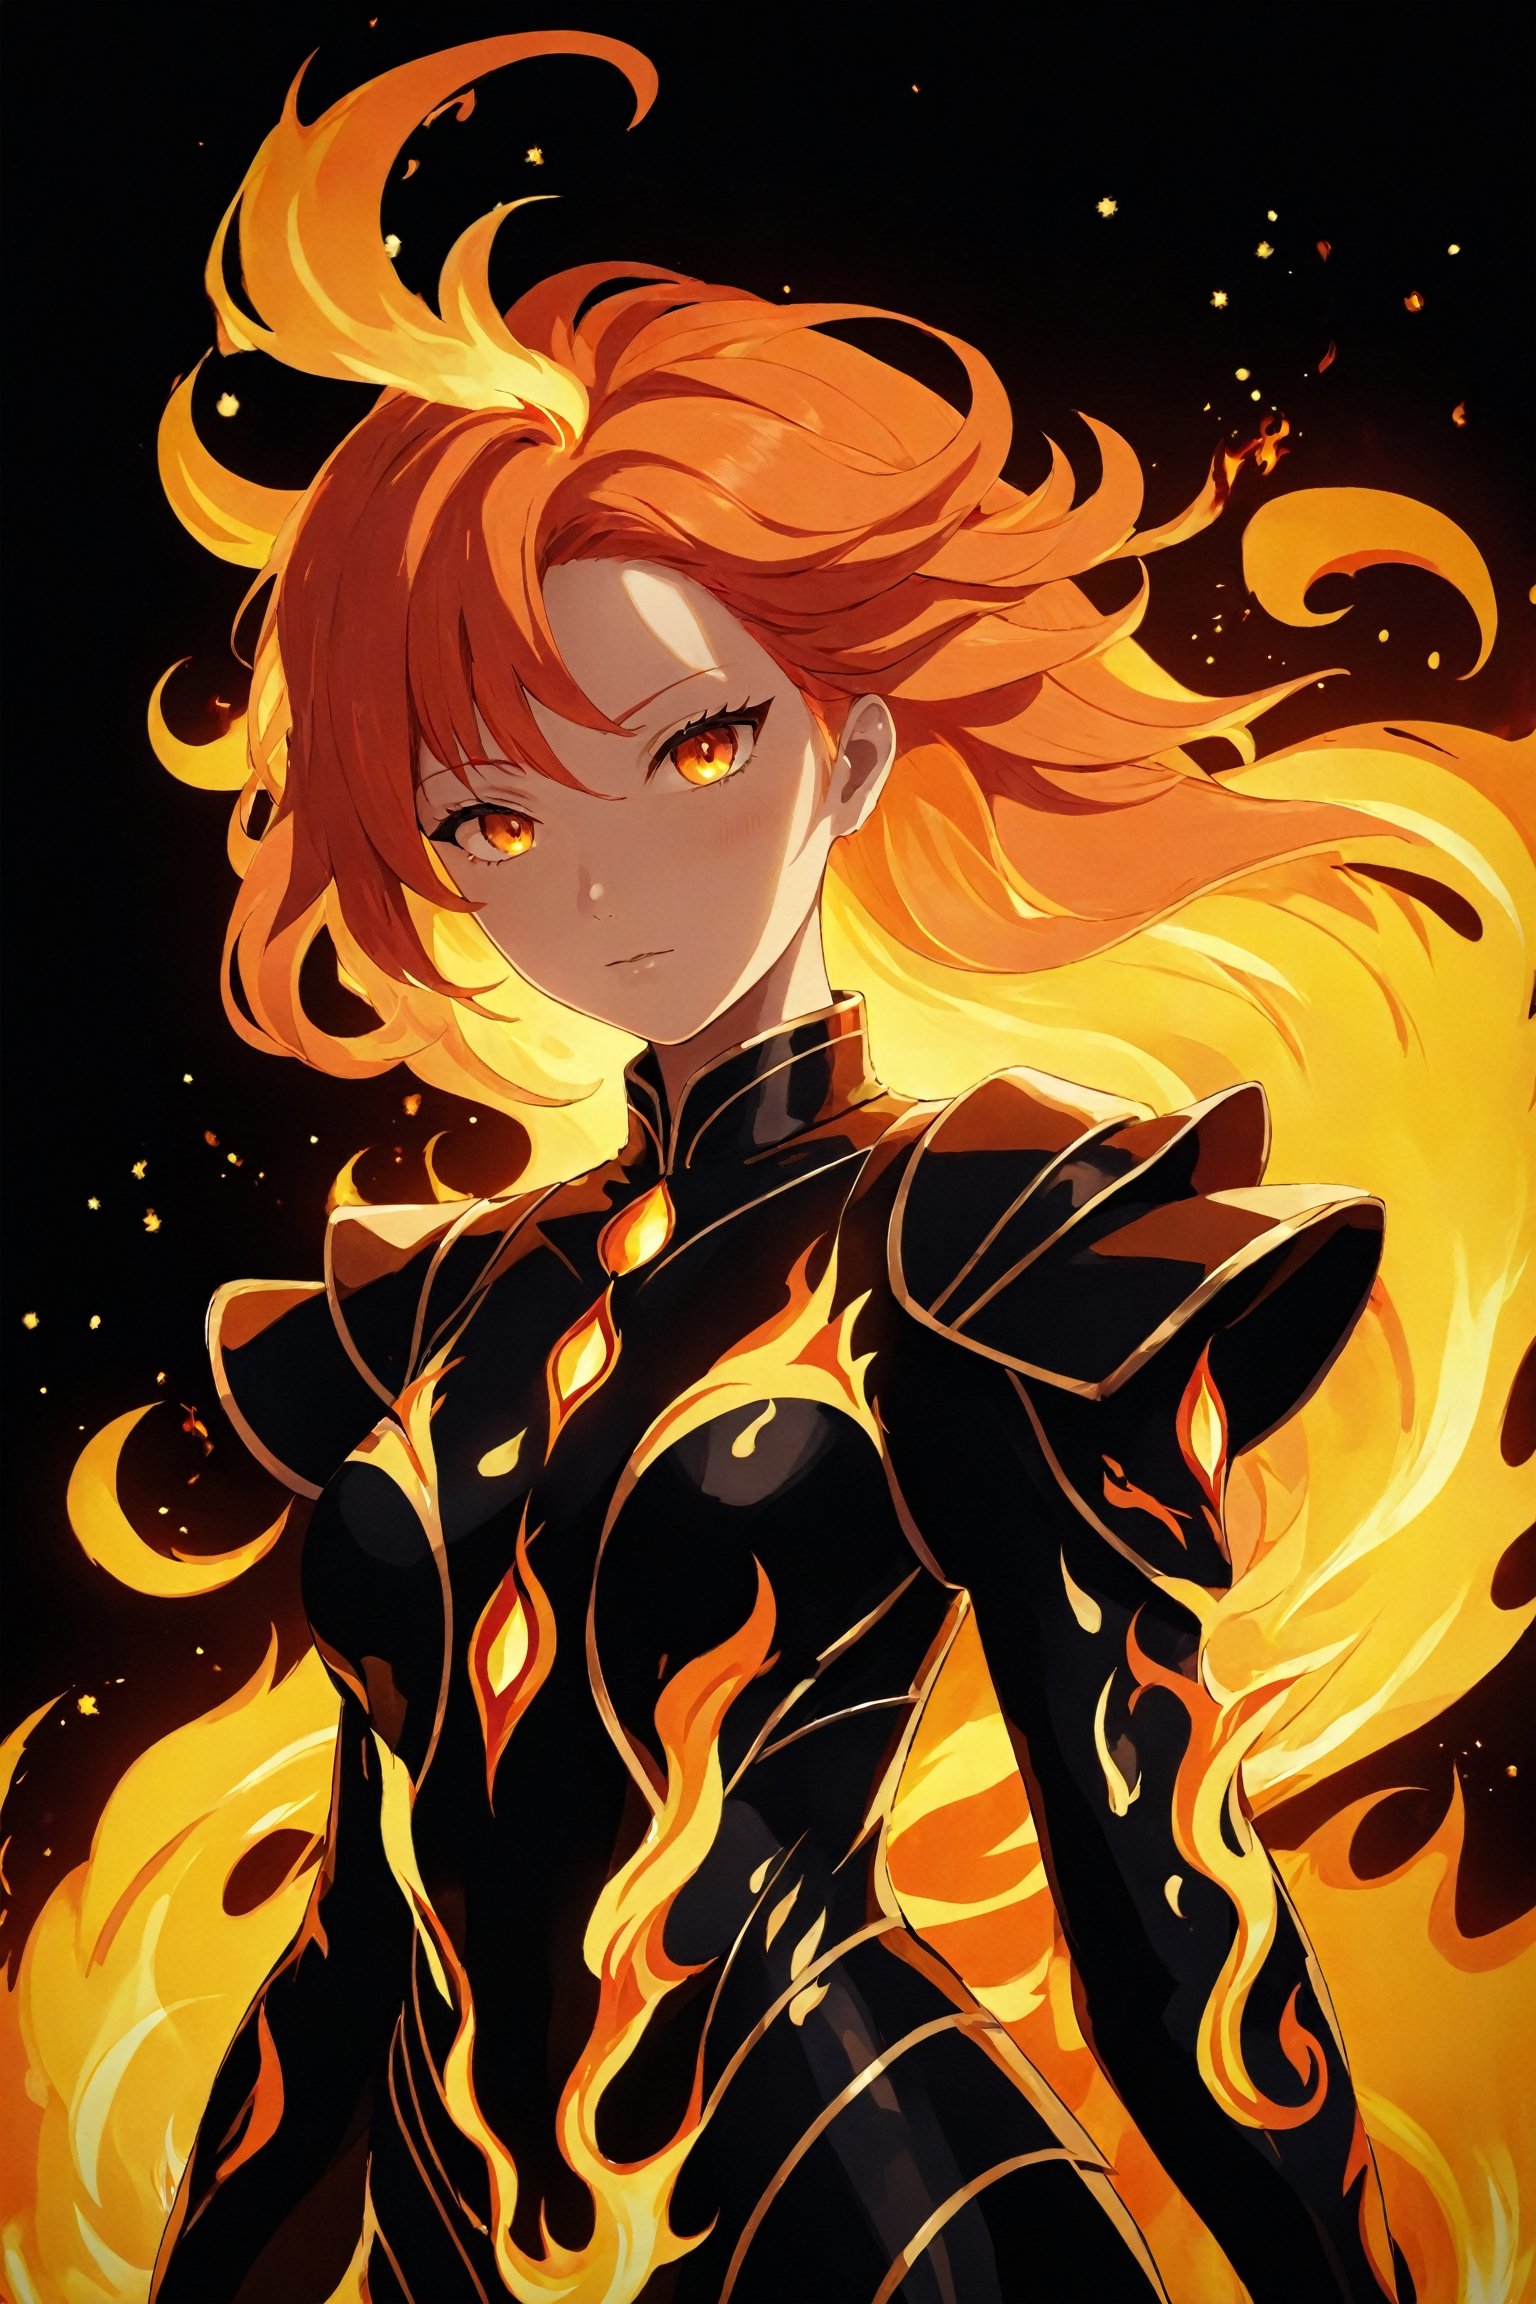 (best quality,8k,ultra detailed), (anime art illustration:1.3), (flat vector image:1.2), (mid-shot:1.3), (minimalistic:1.2), (simple cute diffuse female fire spirit creature:1.3), (woman made entirely of fire:1.3), (flaming hair:1.2), (creature sculpted by flames:1.3), (humanoid form made entirely of fire and not flesh and bones:1.3), (fire is her raw material, her constitution, and her being:1.3), (solid black background:1.2), (ultra sharp focus:1.3), (detailed face:1.2), (posing:1.2), (illuminated:1.2), (magic:1.3), (supernatural fire spirit:1.3), (flames:1.3), (sparkles:1.3), (mystical fire spirit:1.3).